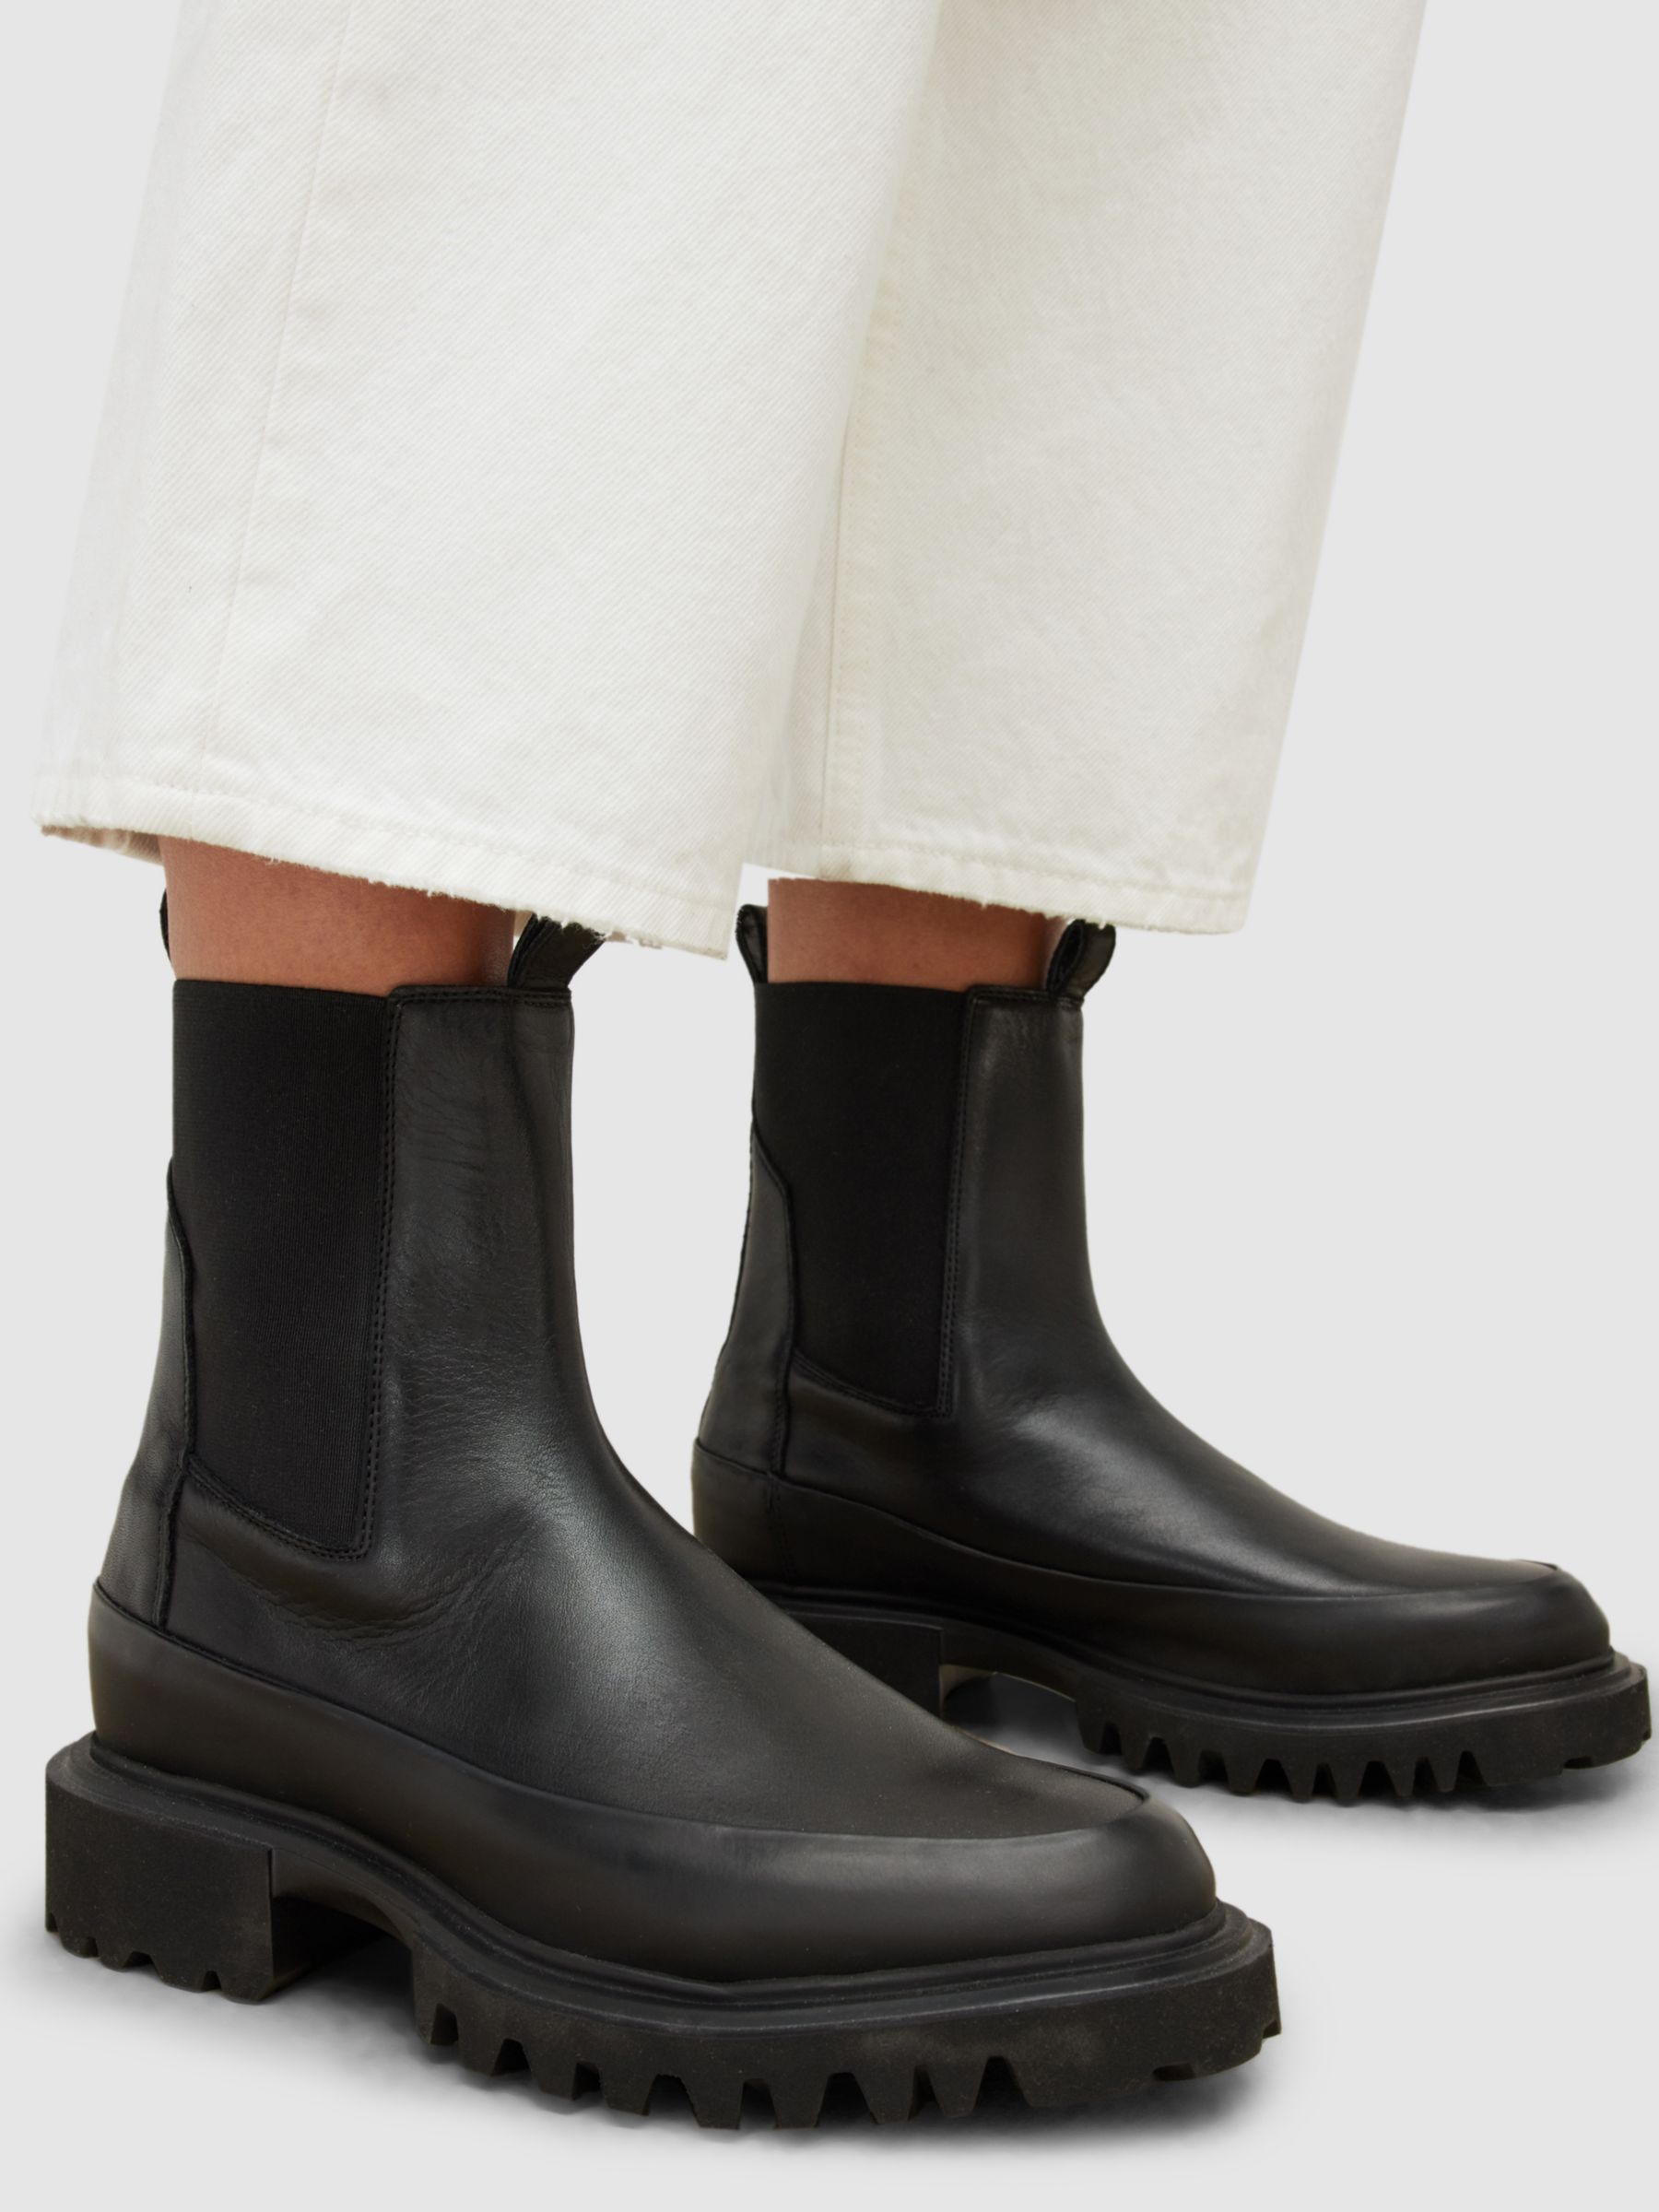 AllSaints Harlee Leather Chelsea Boots, Black at John Lewis & Partners